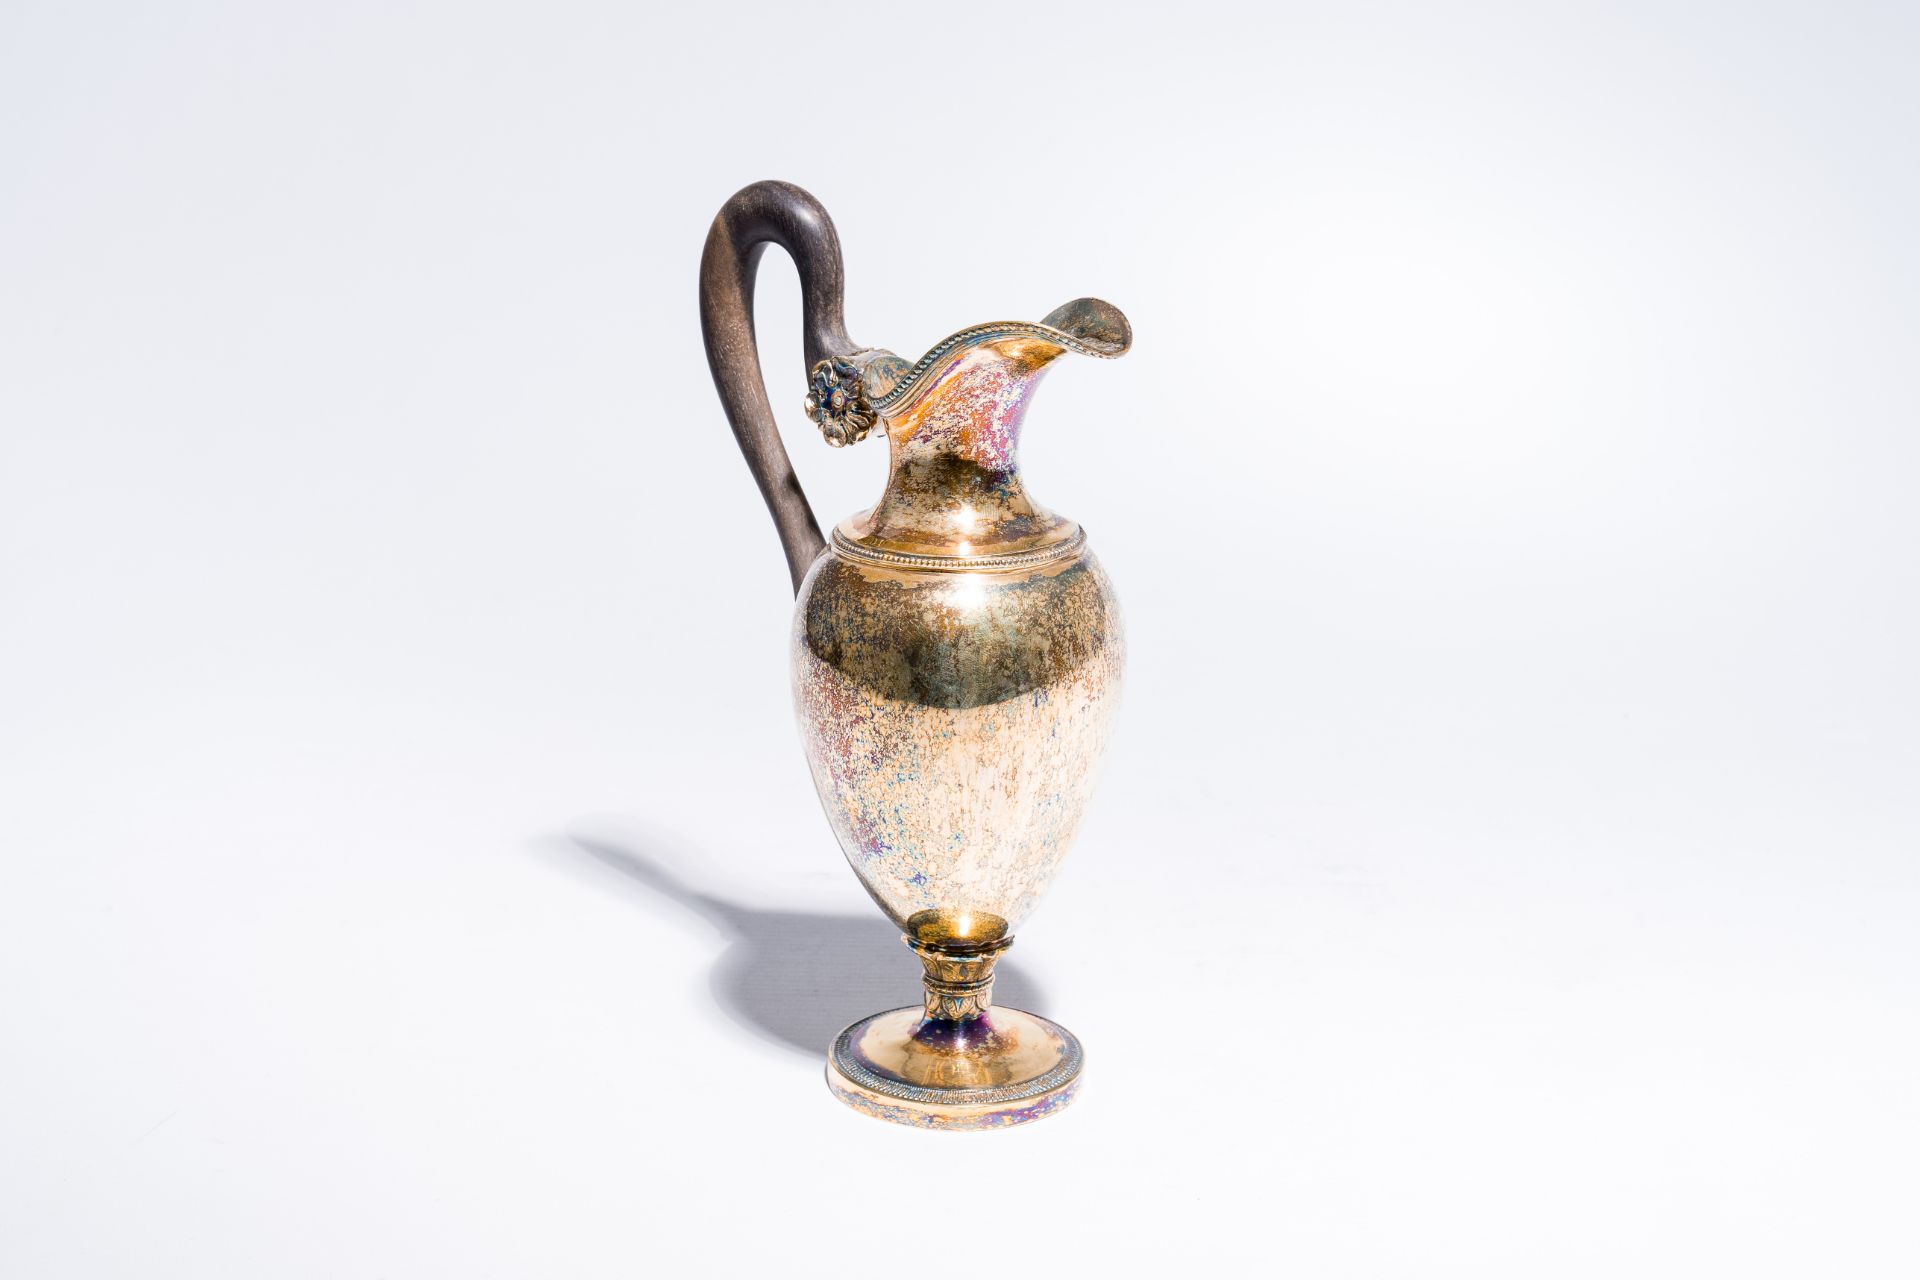 A Belgian gilt silver ewer with a mascaron and a wood handle, maker's mark K, first third 19th C.